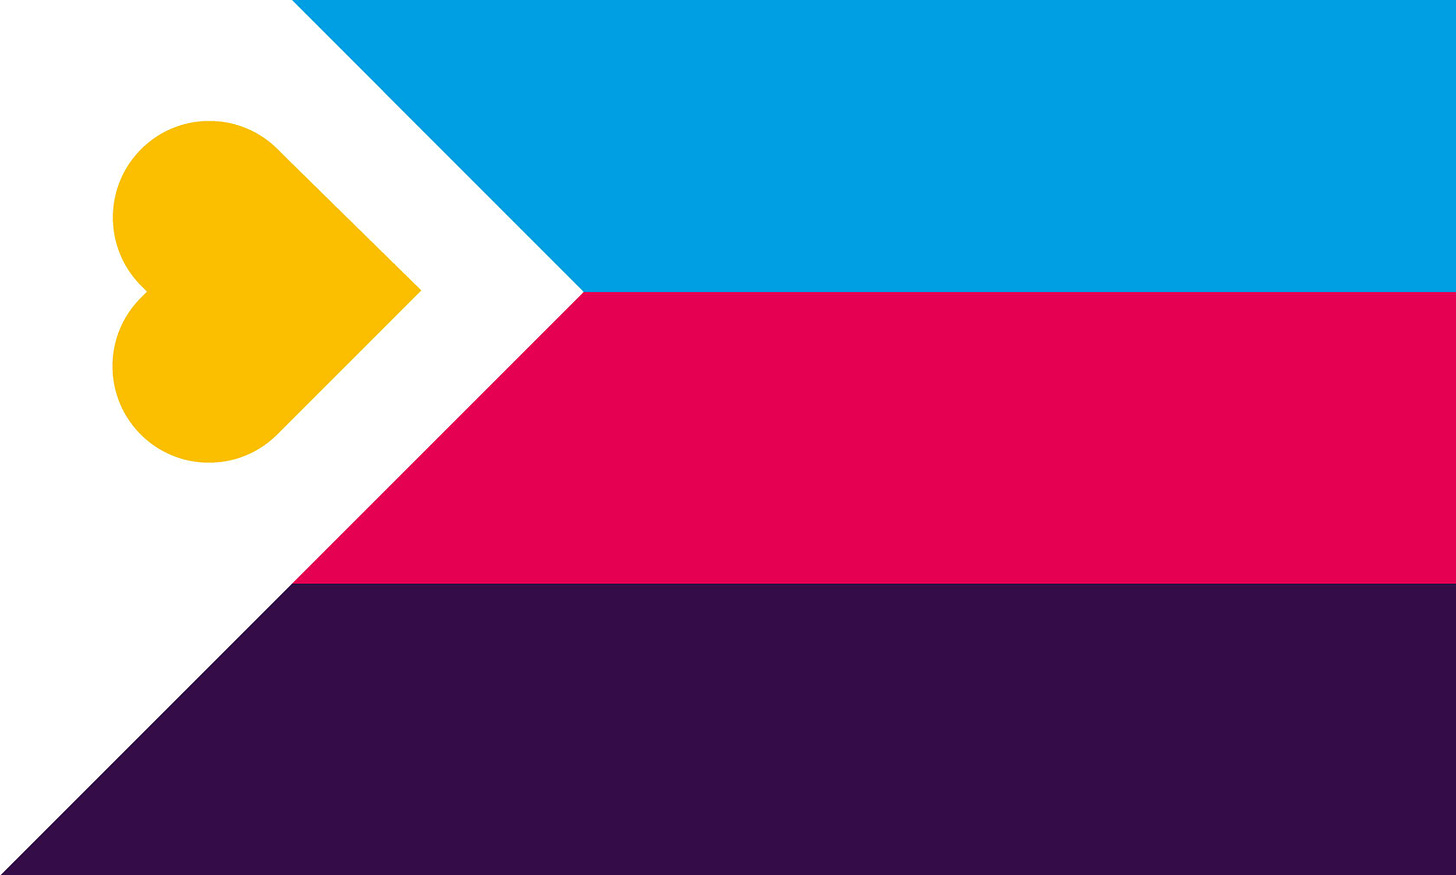 Pride Flags Glossary | Resource Center for Sexual & Gender Diversity